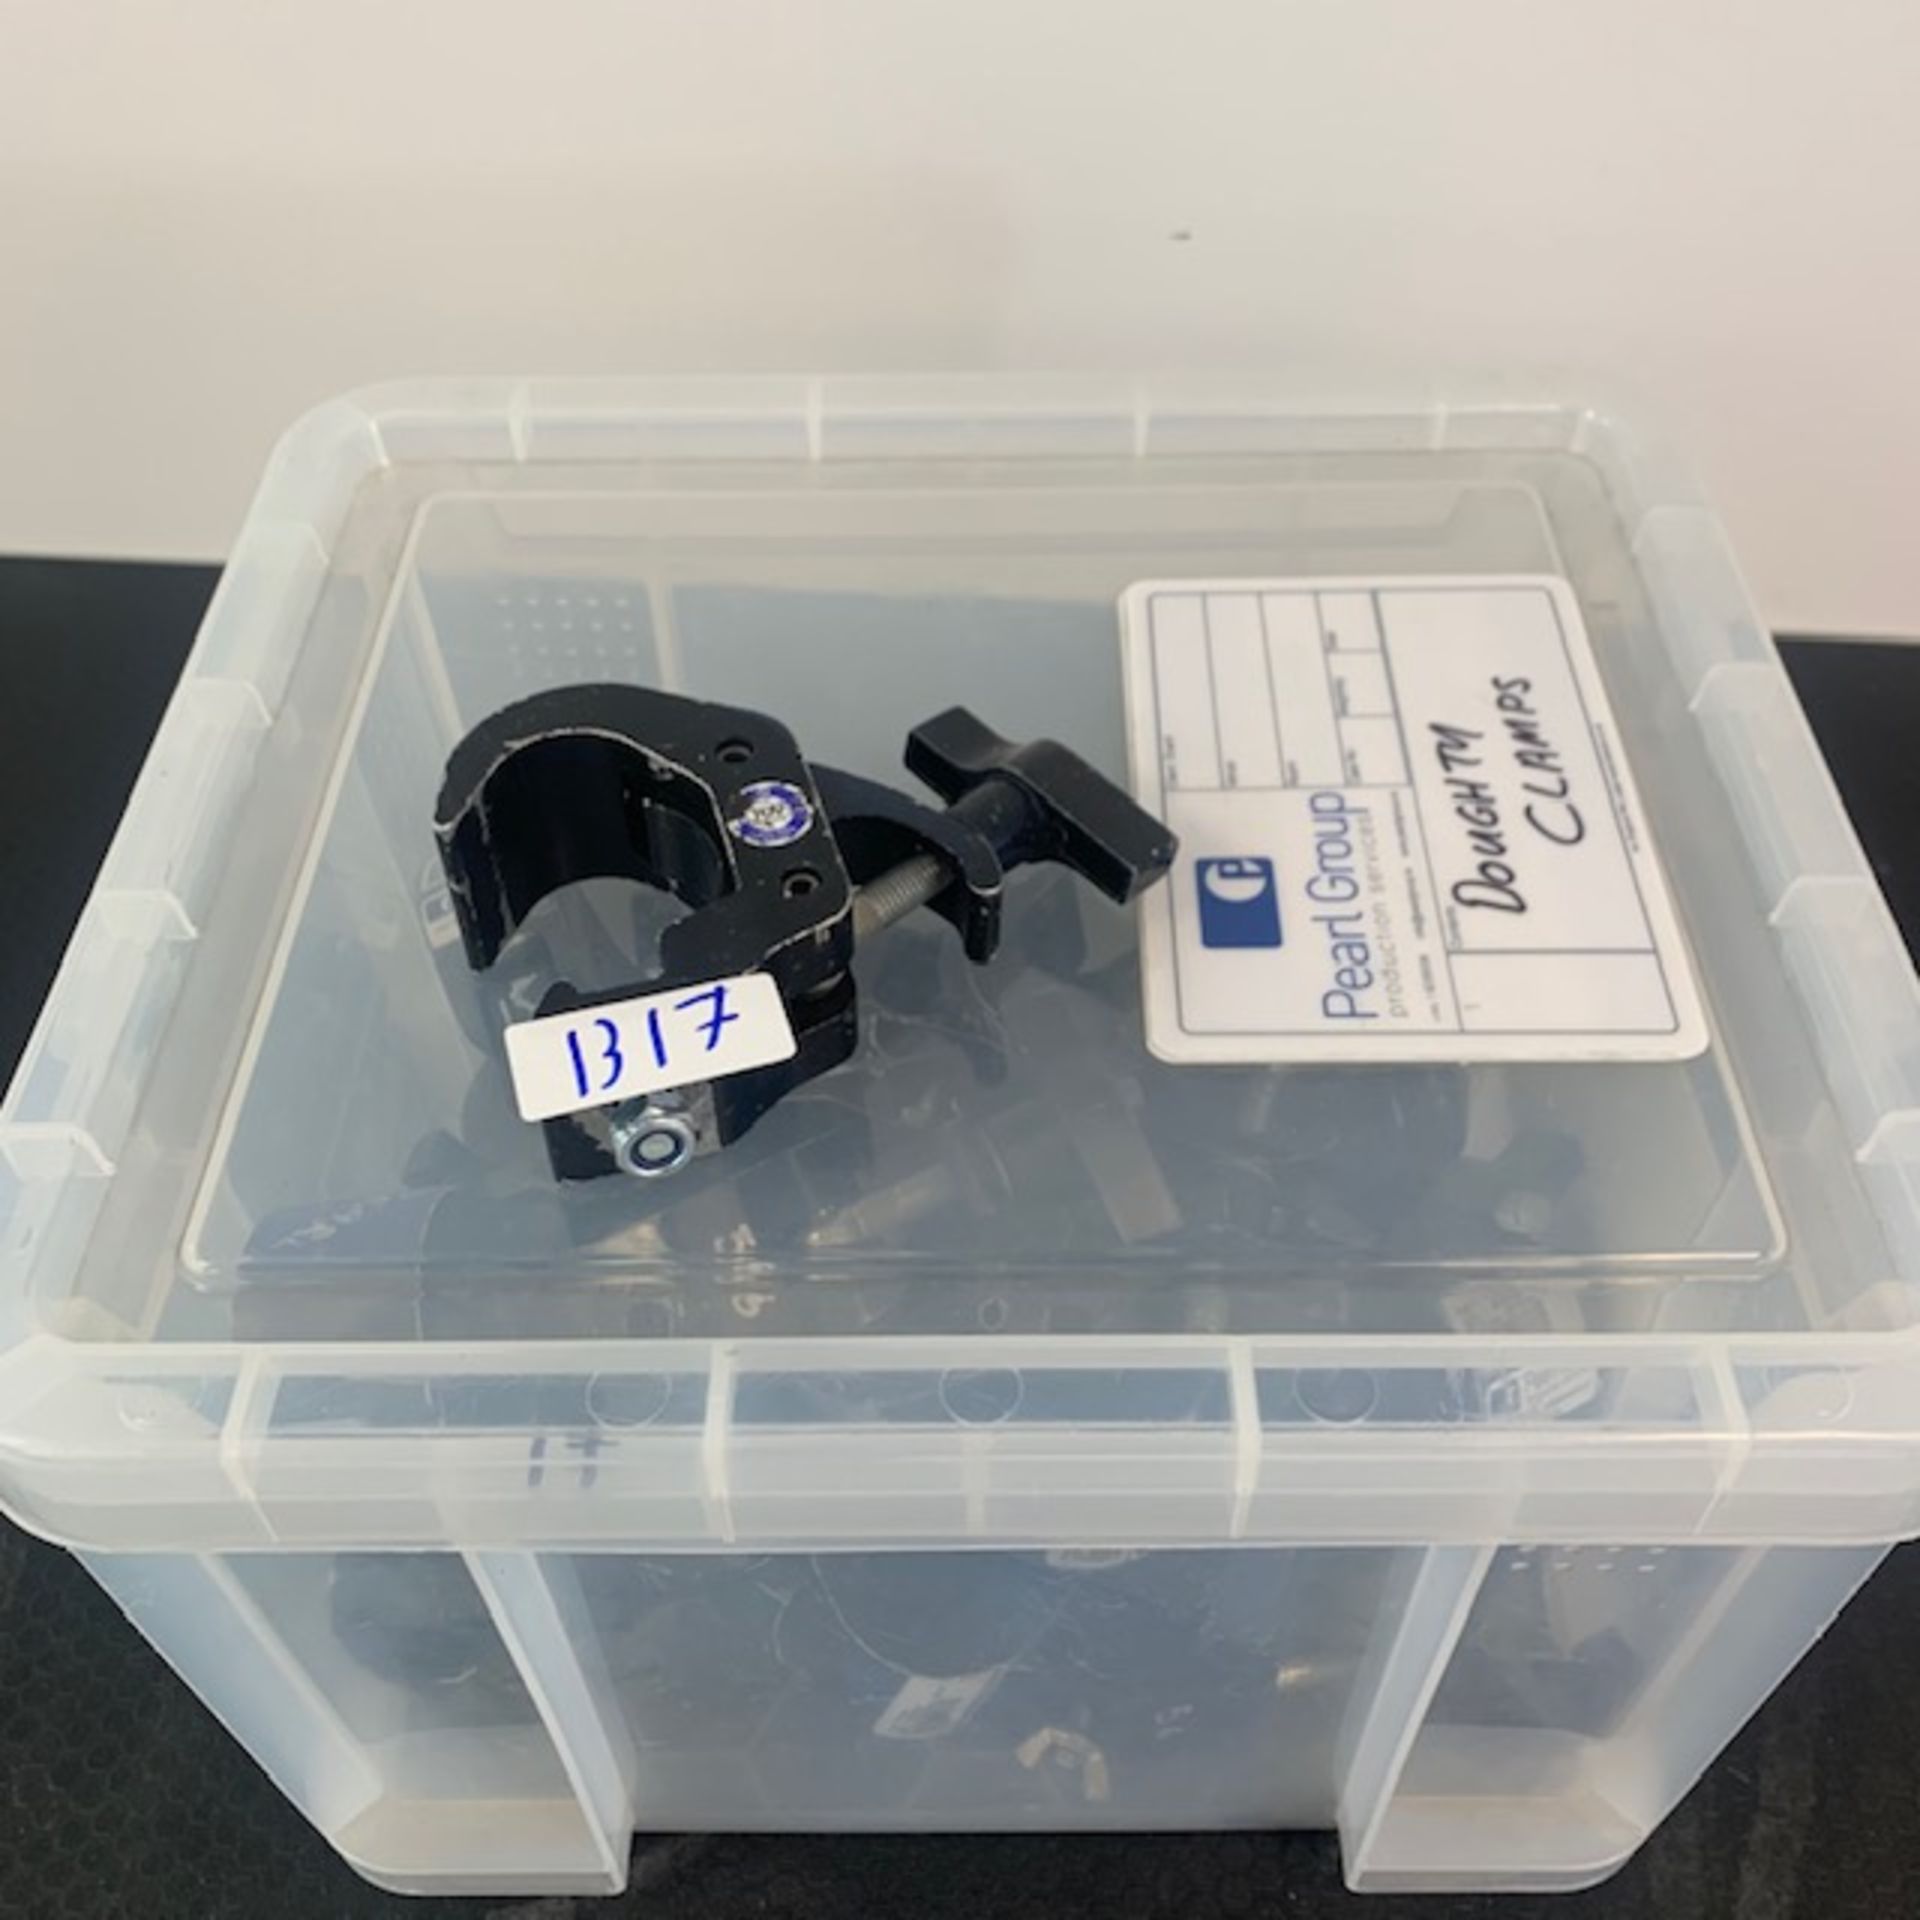 22 X Doughty Heavy Duty Clamps In A Box - Ref: 1317 - CL581 - Location: Altrincham WA14Items will be